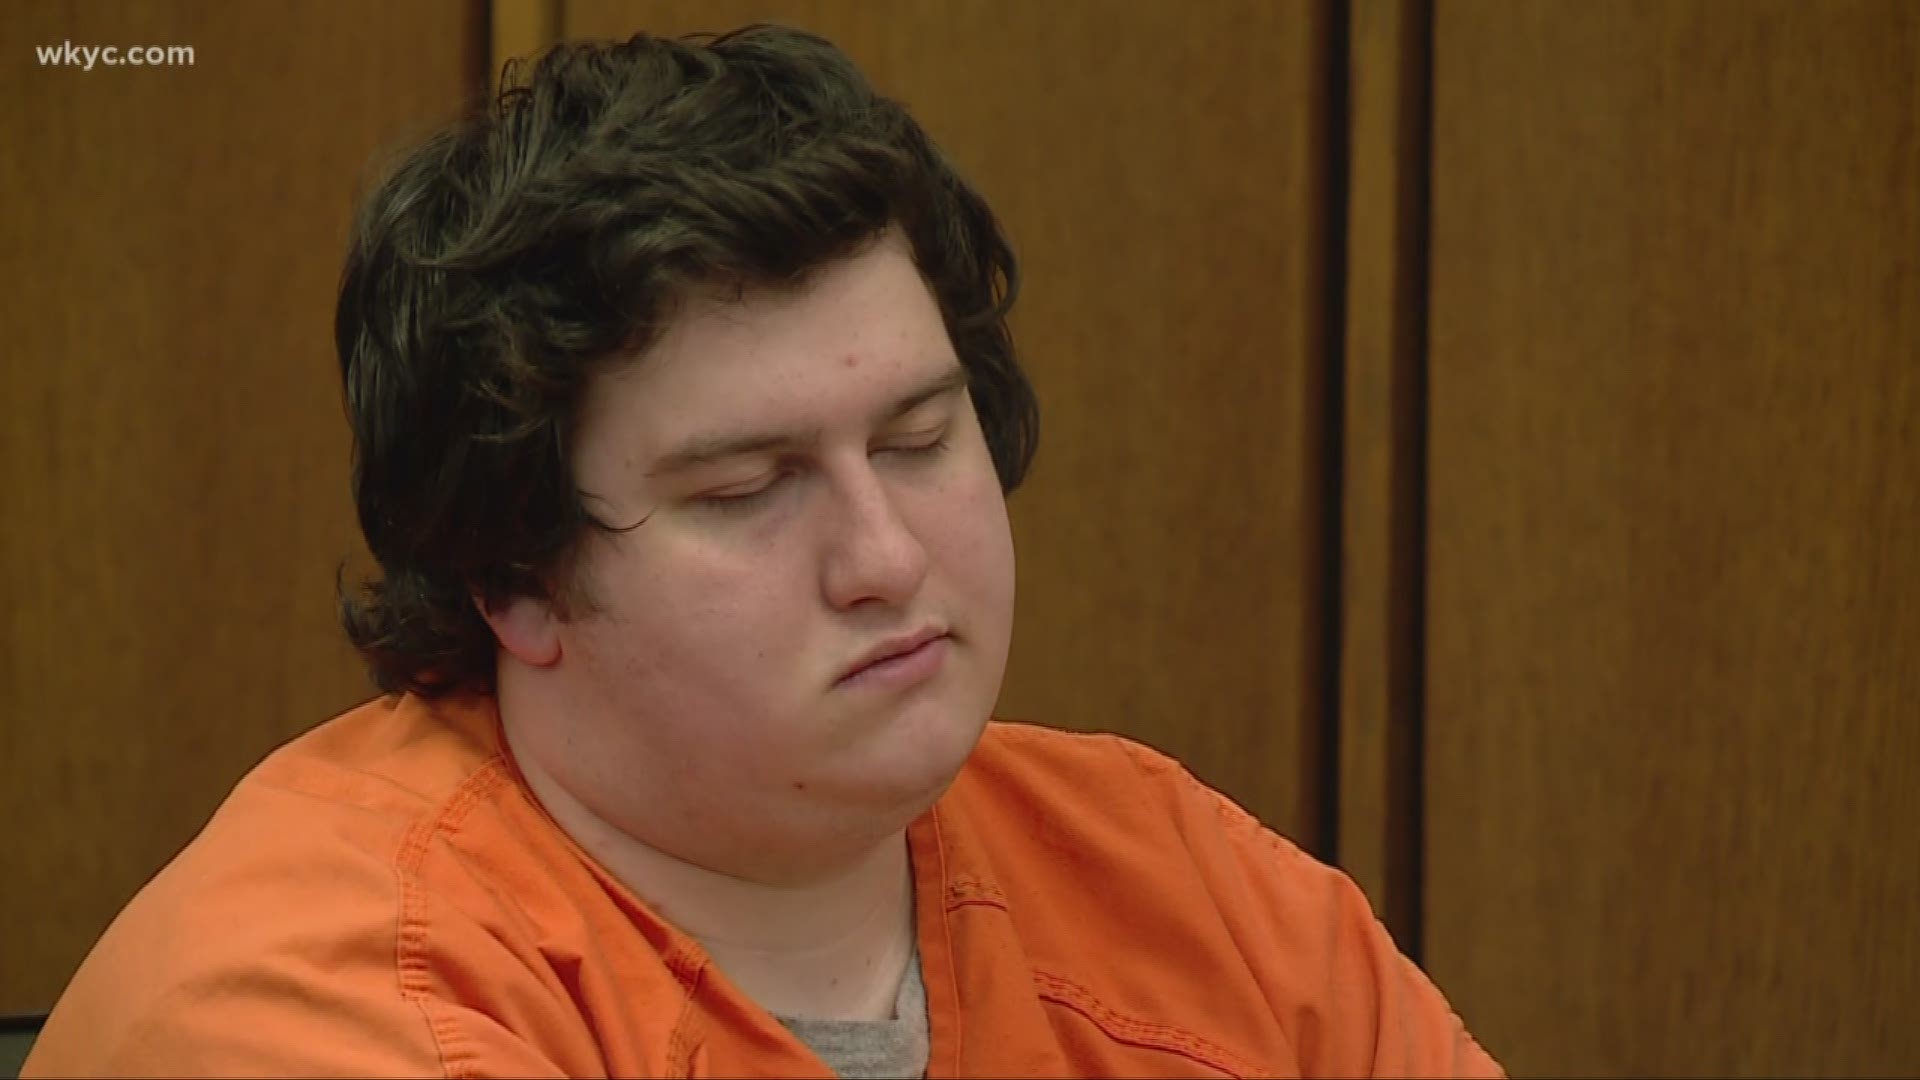 Video confession to be allowed in trial of Jeffery scullin